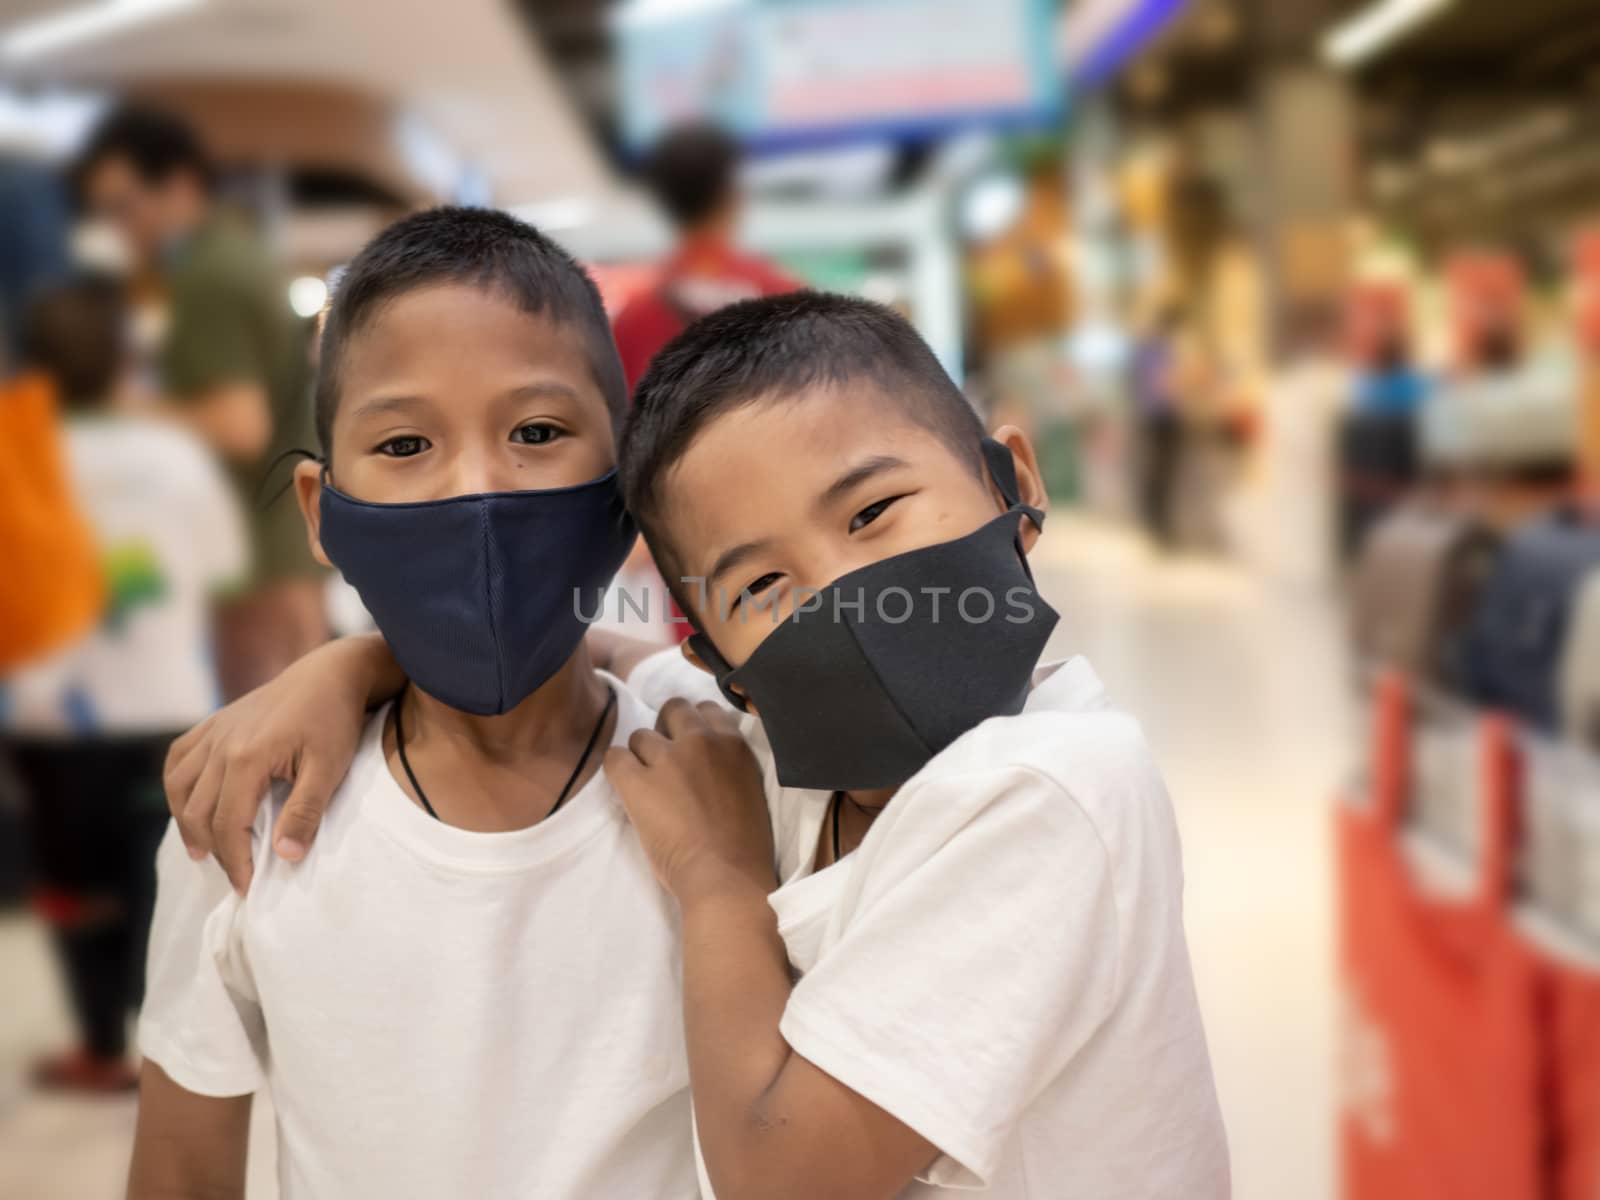 Two boy wearing a protective mask While in the mall. by Unimages2527